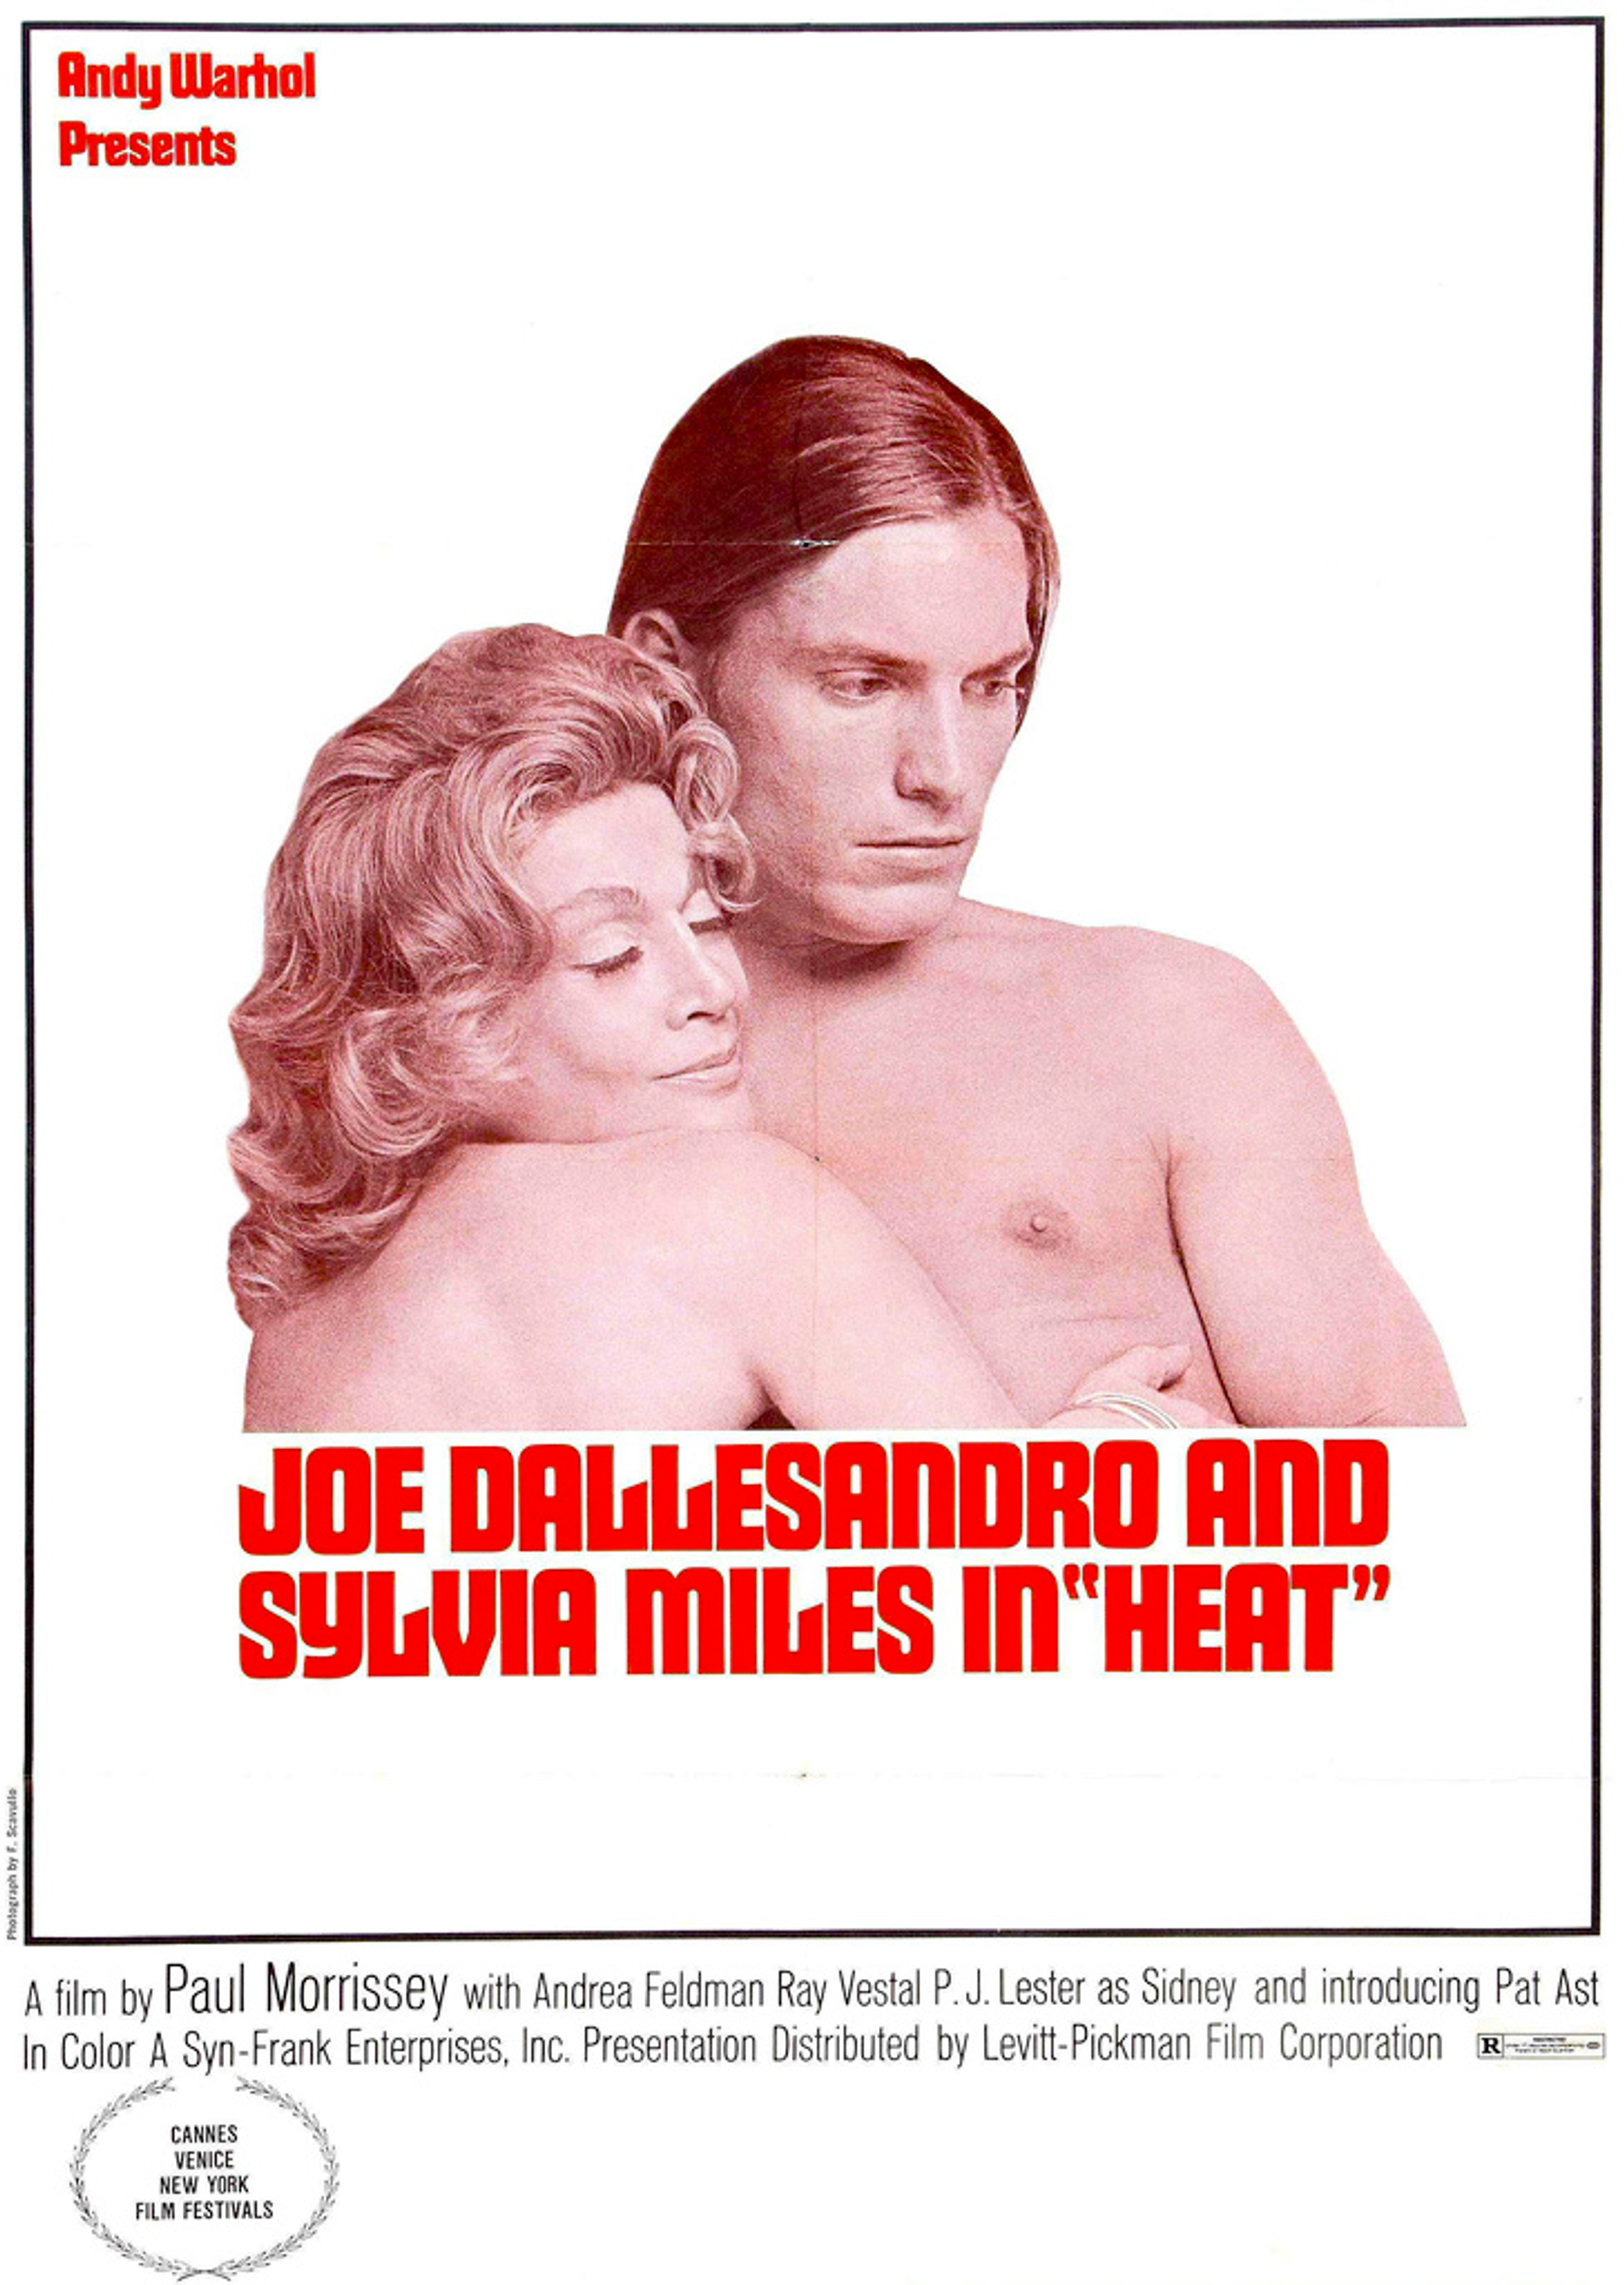 The poster for the movie Heat. A couple is seen hugging while shirtless, depicted in red gradients.